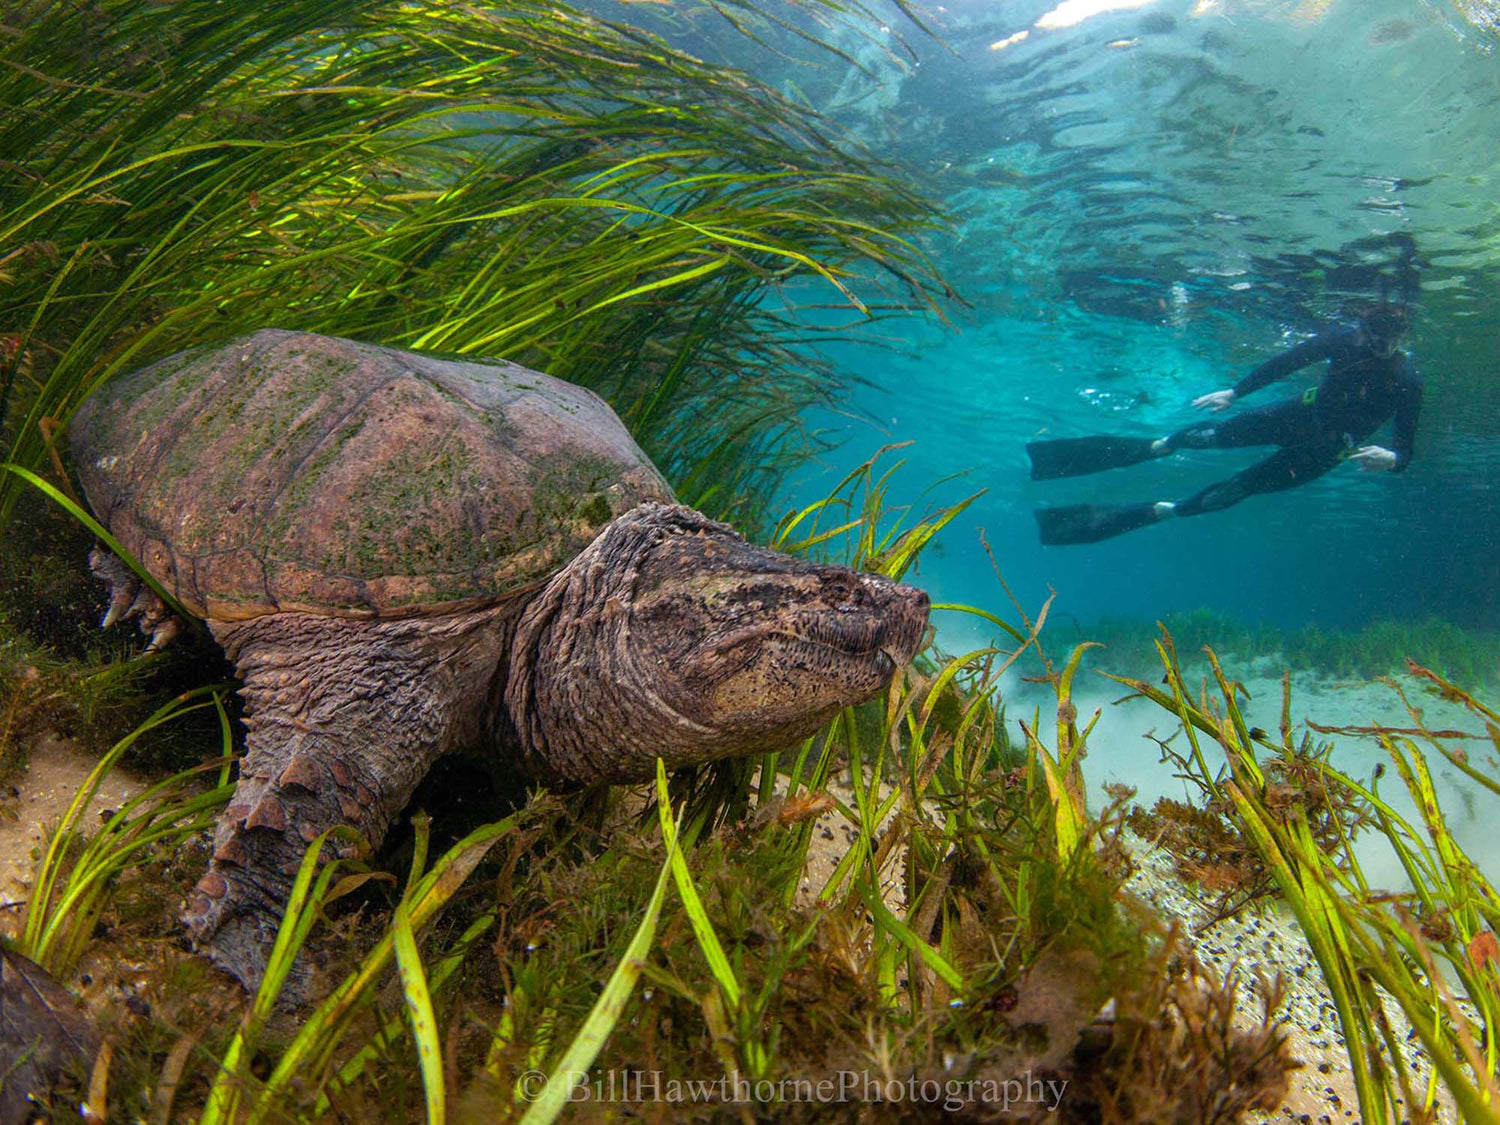 Featured Customers | Bill Hawthorne The Turtles of Florida